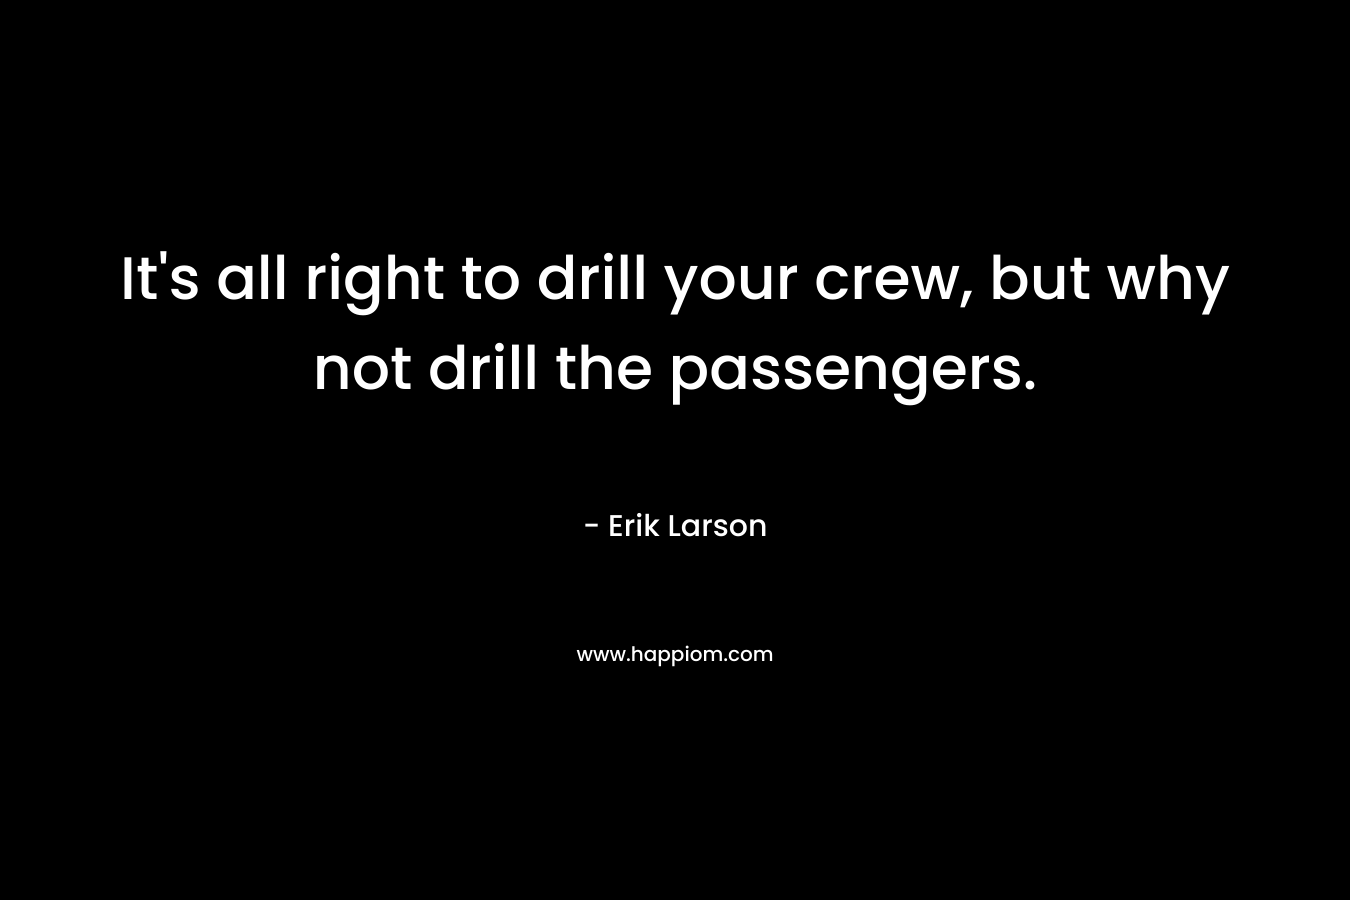 It's all right to drill your crew, but why not drill the passengers.